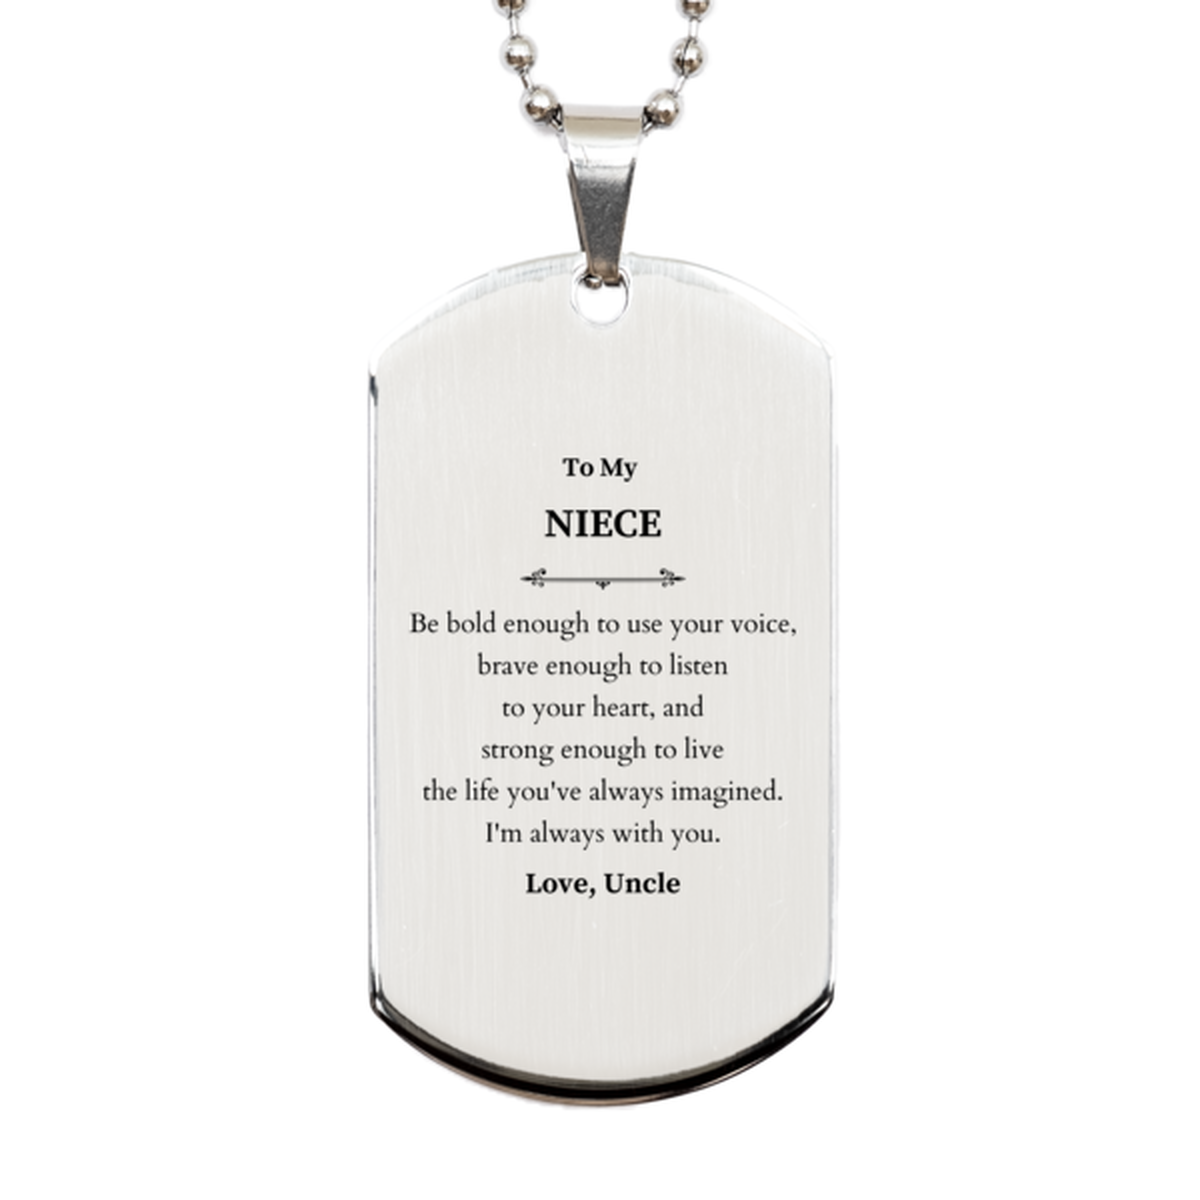 Keepsake Niece Silver Dog Tag Gift Idea Graduation Christmas Birthday Niece from Uncle, Niece Be bold enough to use your voice, brave enough to listen to your heart. Love, Uncle